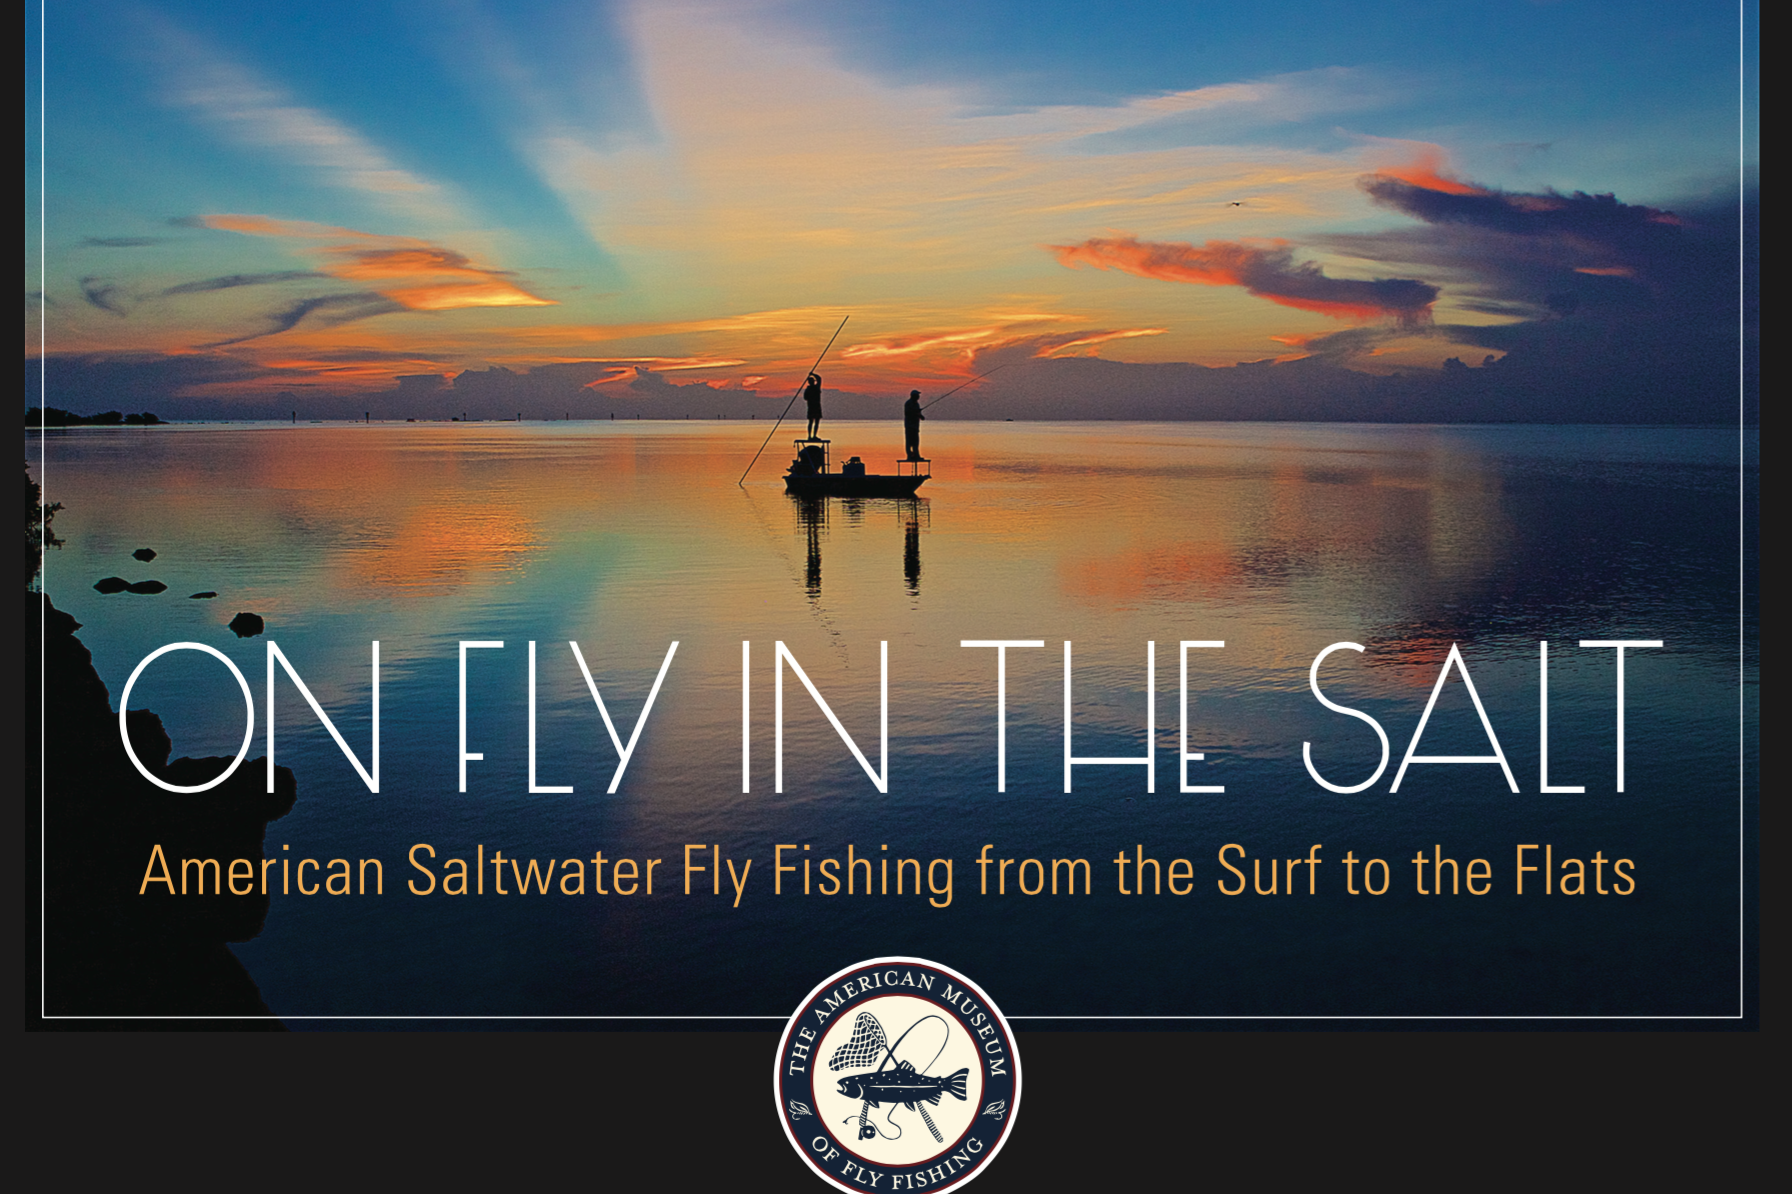 saltwater fly fishing Archives - On The Water